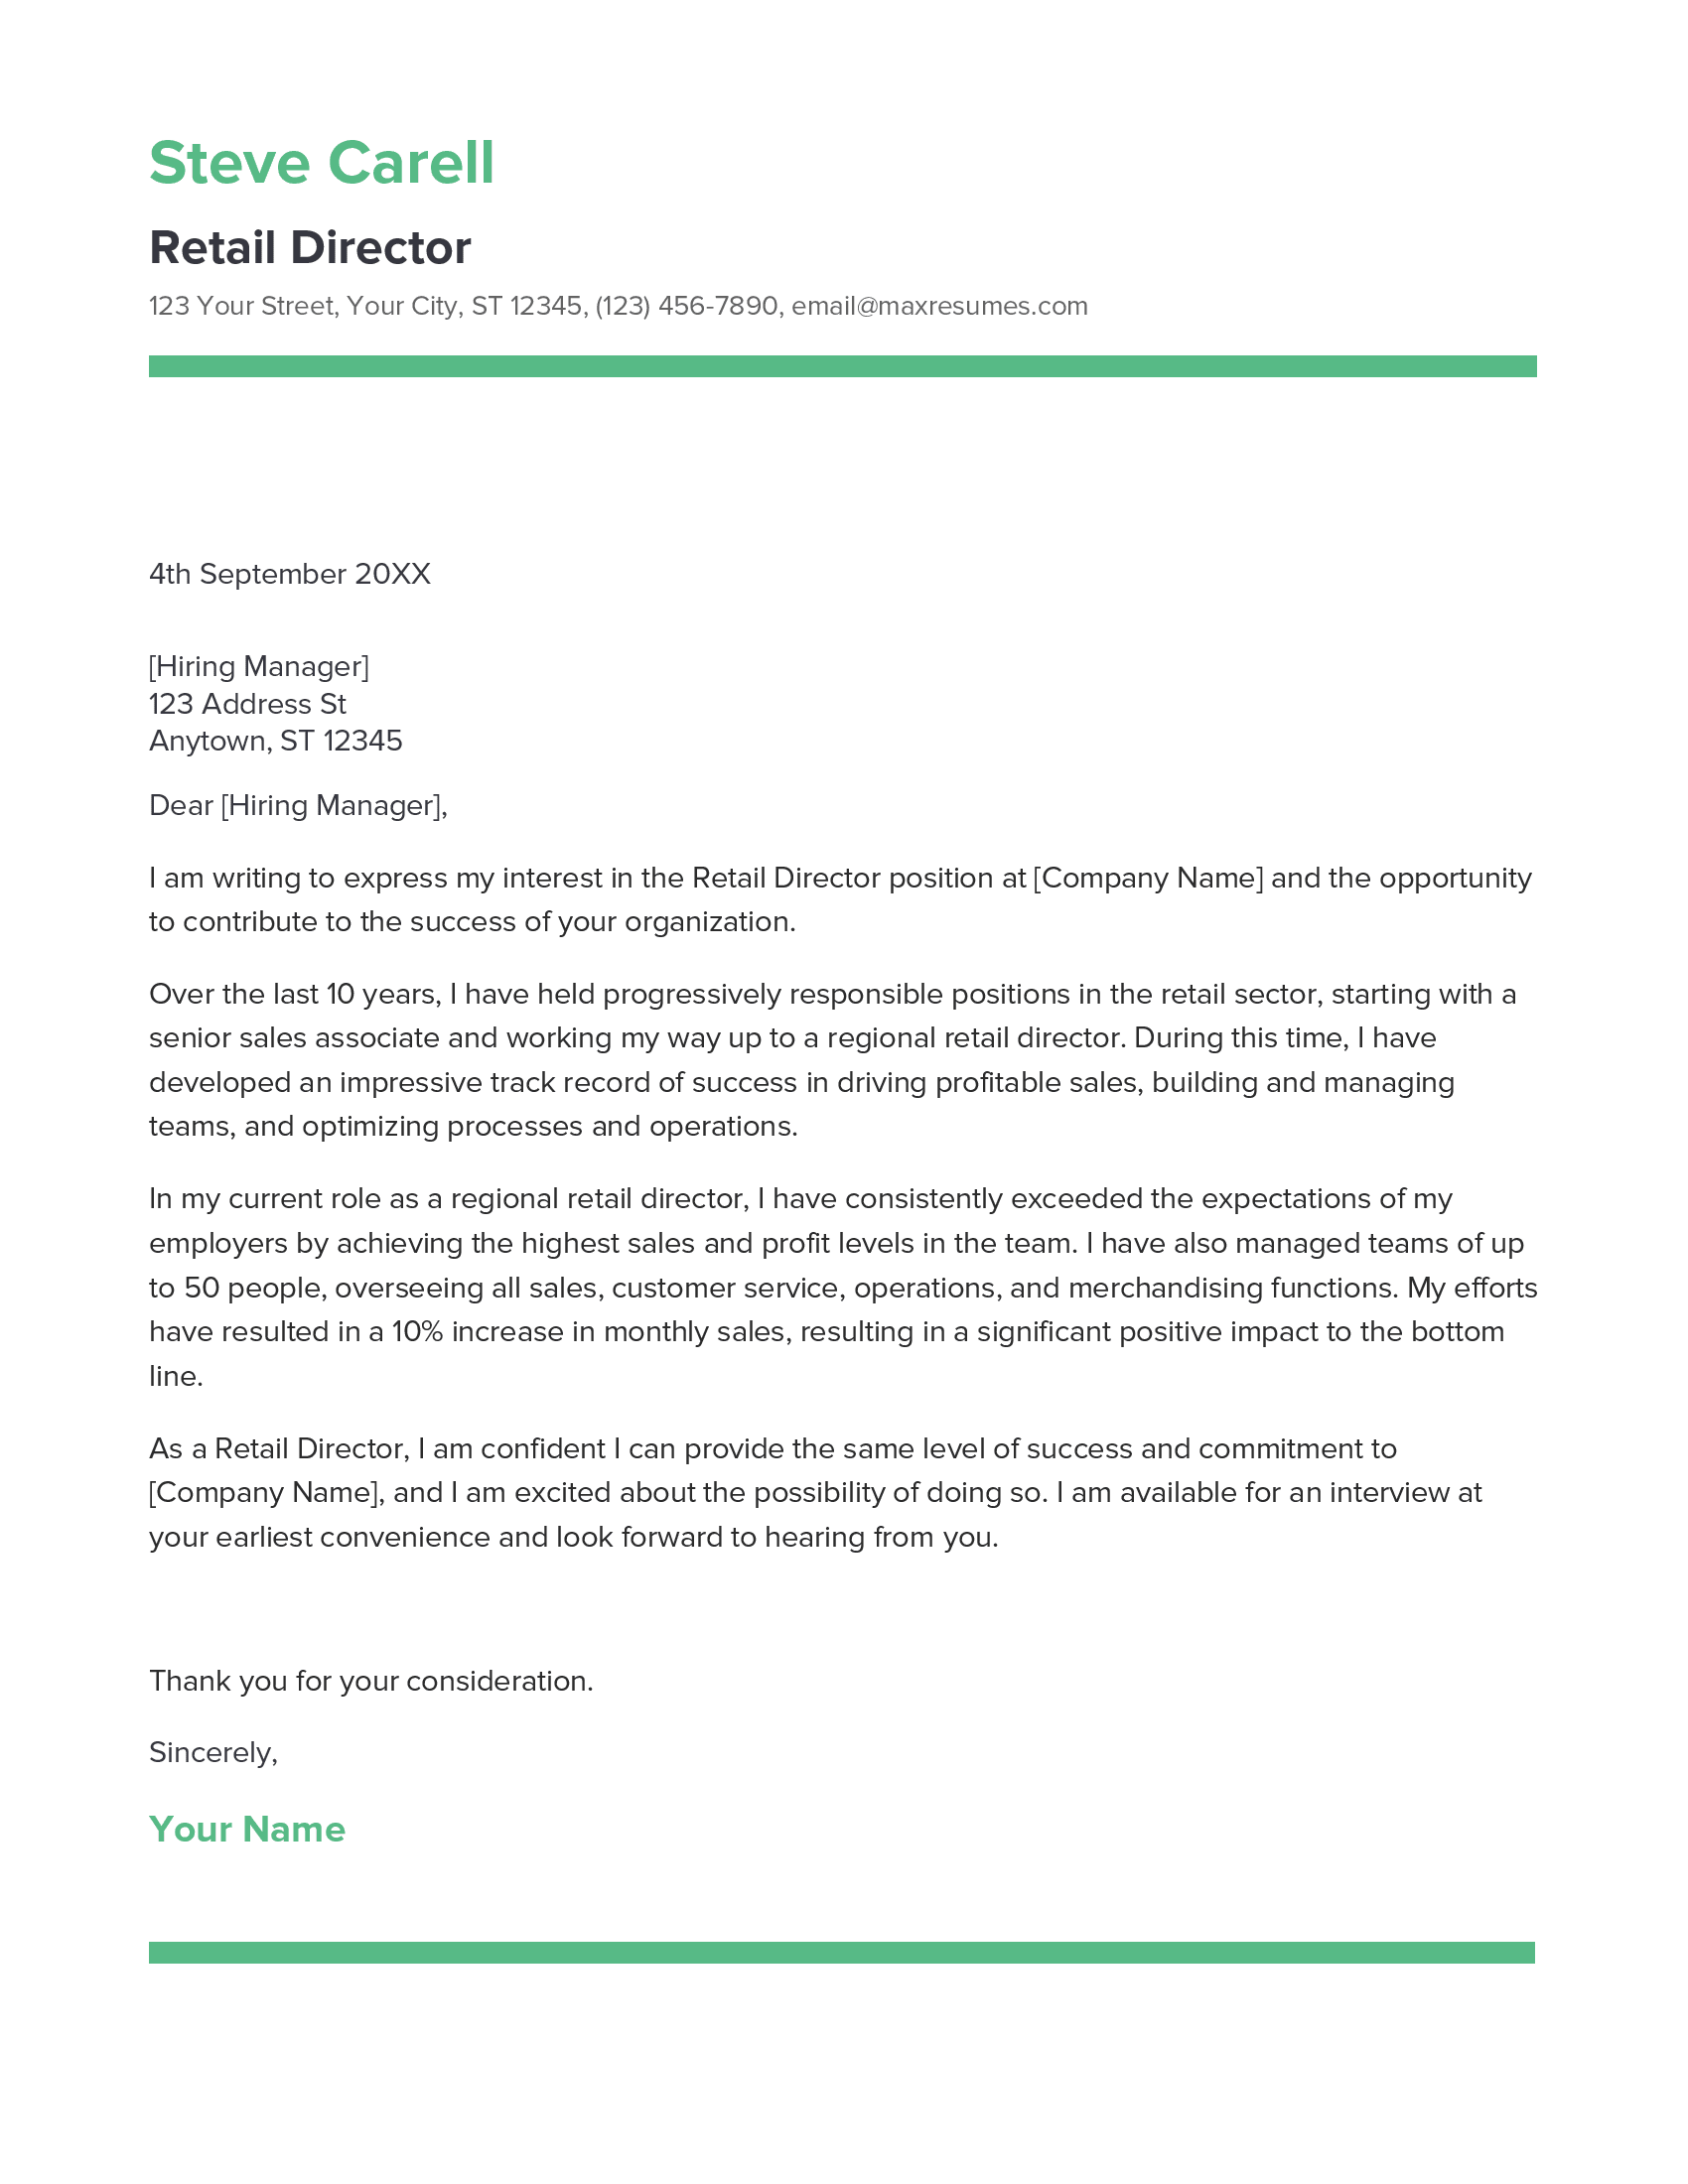 Retail Director Cover Letter Example